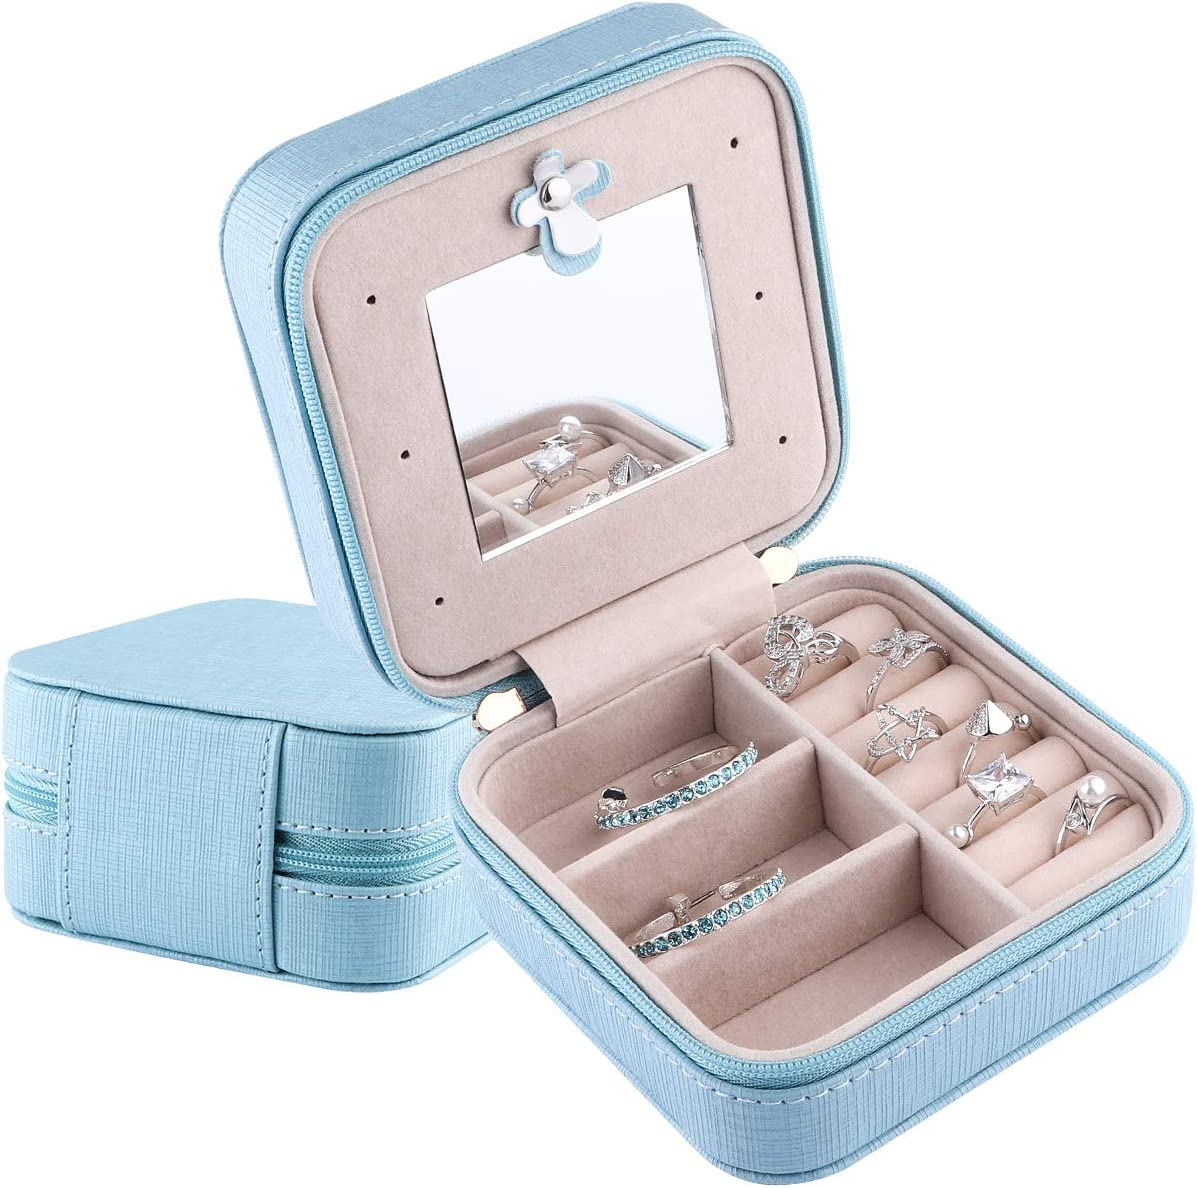 Small Jewelry Box, Travel Mini Organizer Portable Display Storage Case for Rings Earrings Necklace,Gifts for Girls Women (Blue)